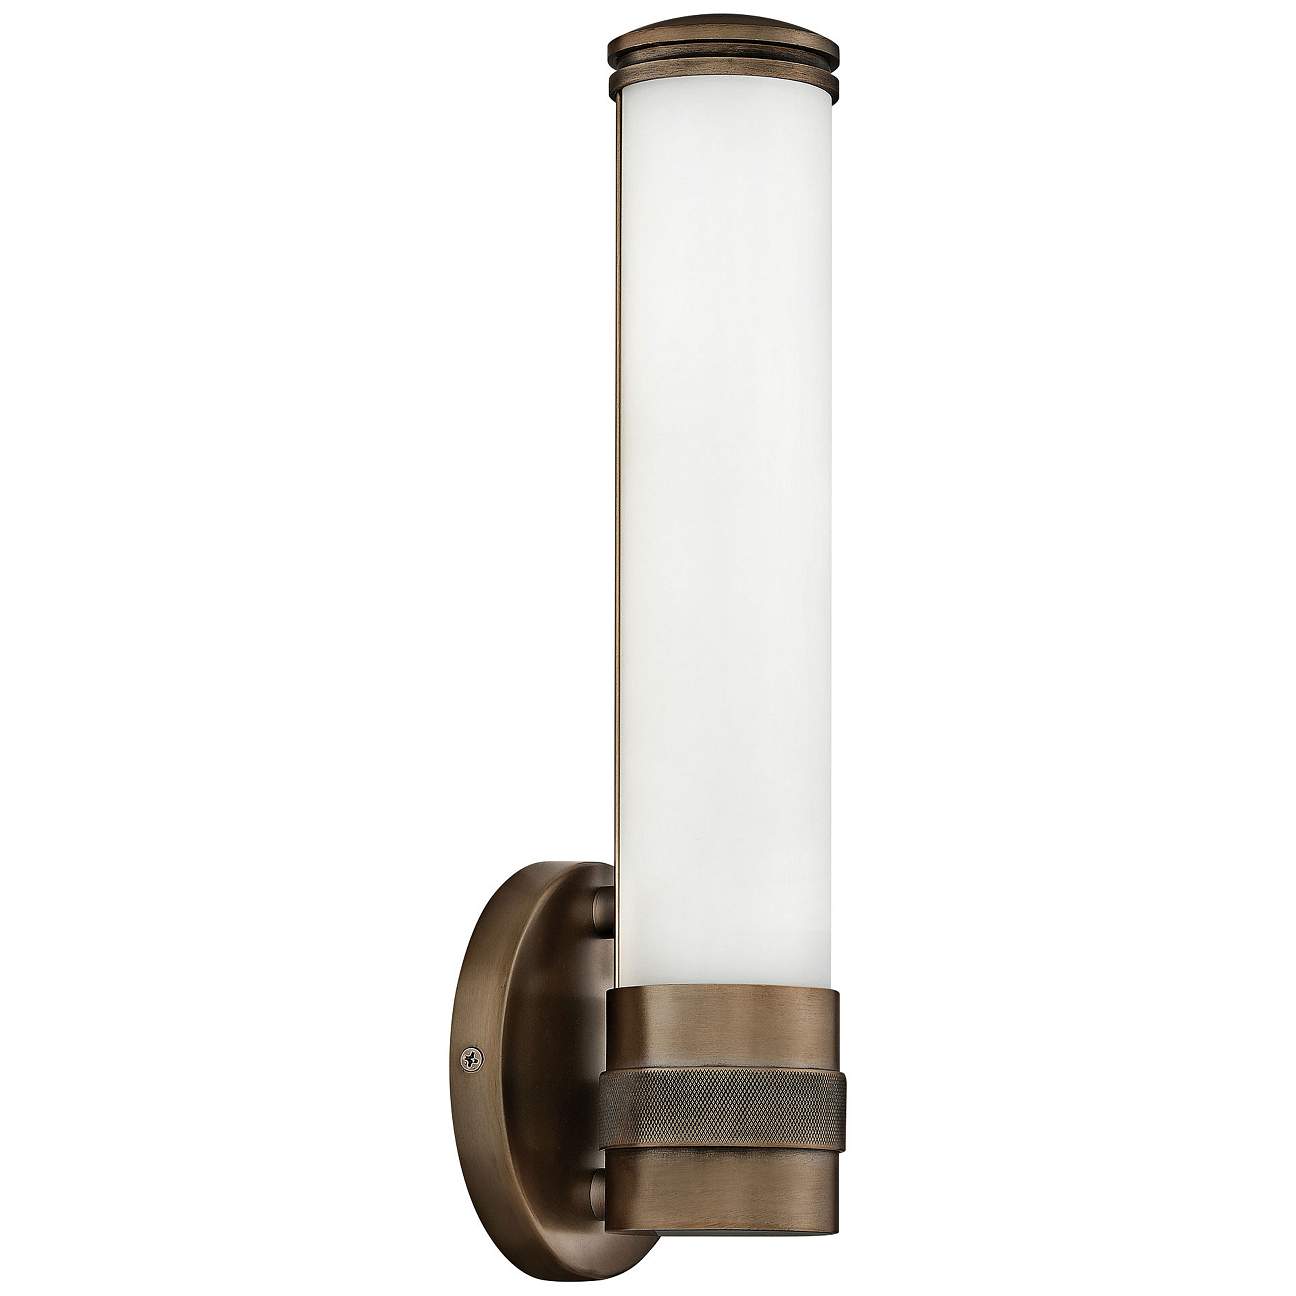 Hinkley Remi 14 And One Quarter Inch High Champagne Bronze Led Wall Sconce  63j28 ?qlt=65&wid=1296&hei=1296&op Sharpen=1&fmt=jpeg